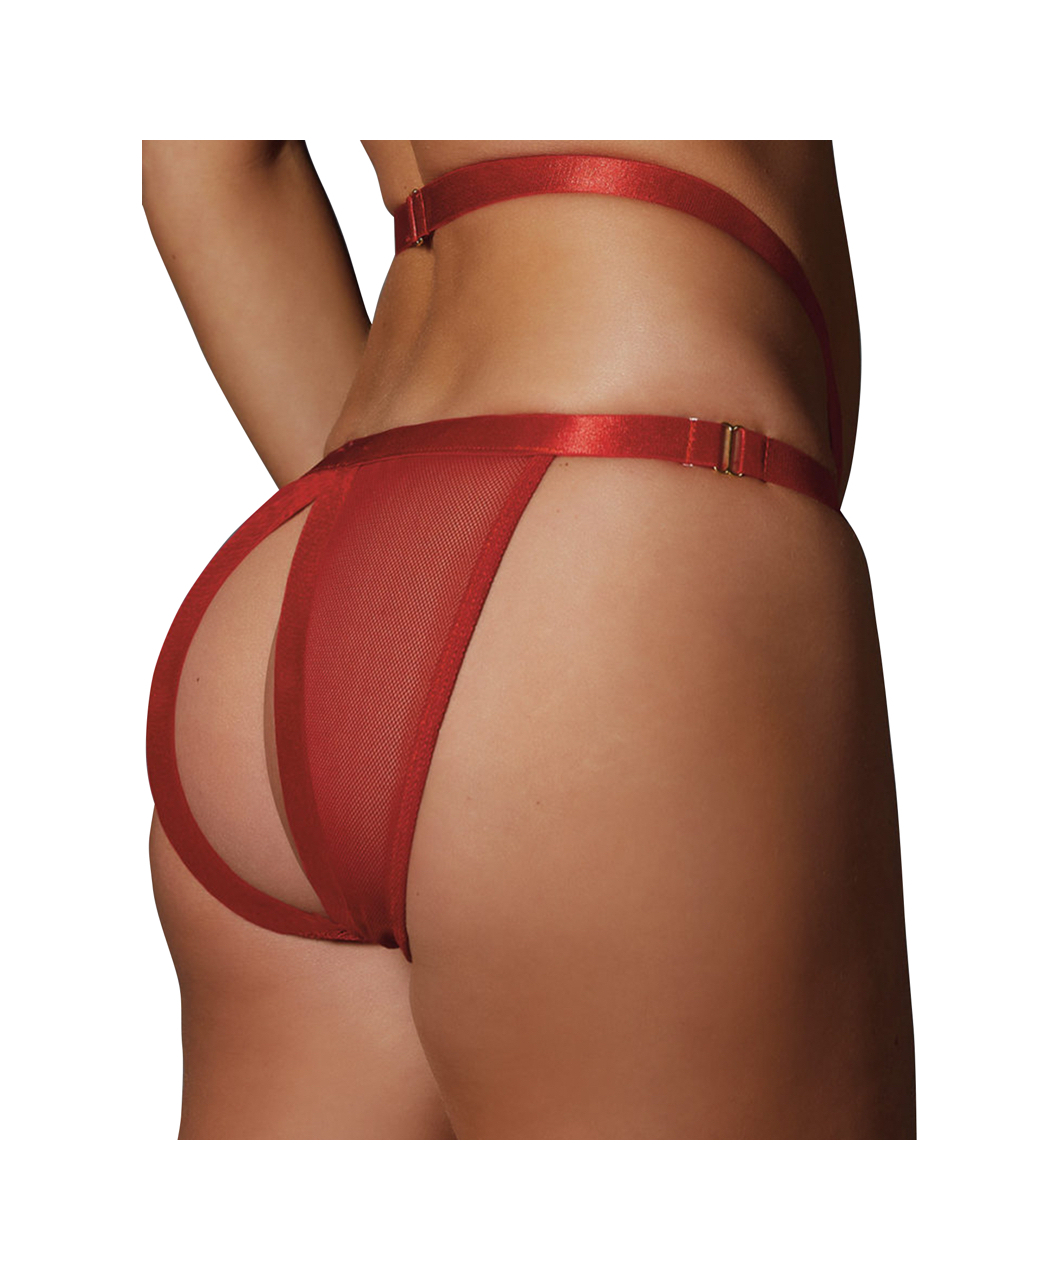 Allure Lingerie Dream of Me red crotchless thong